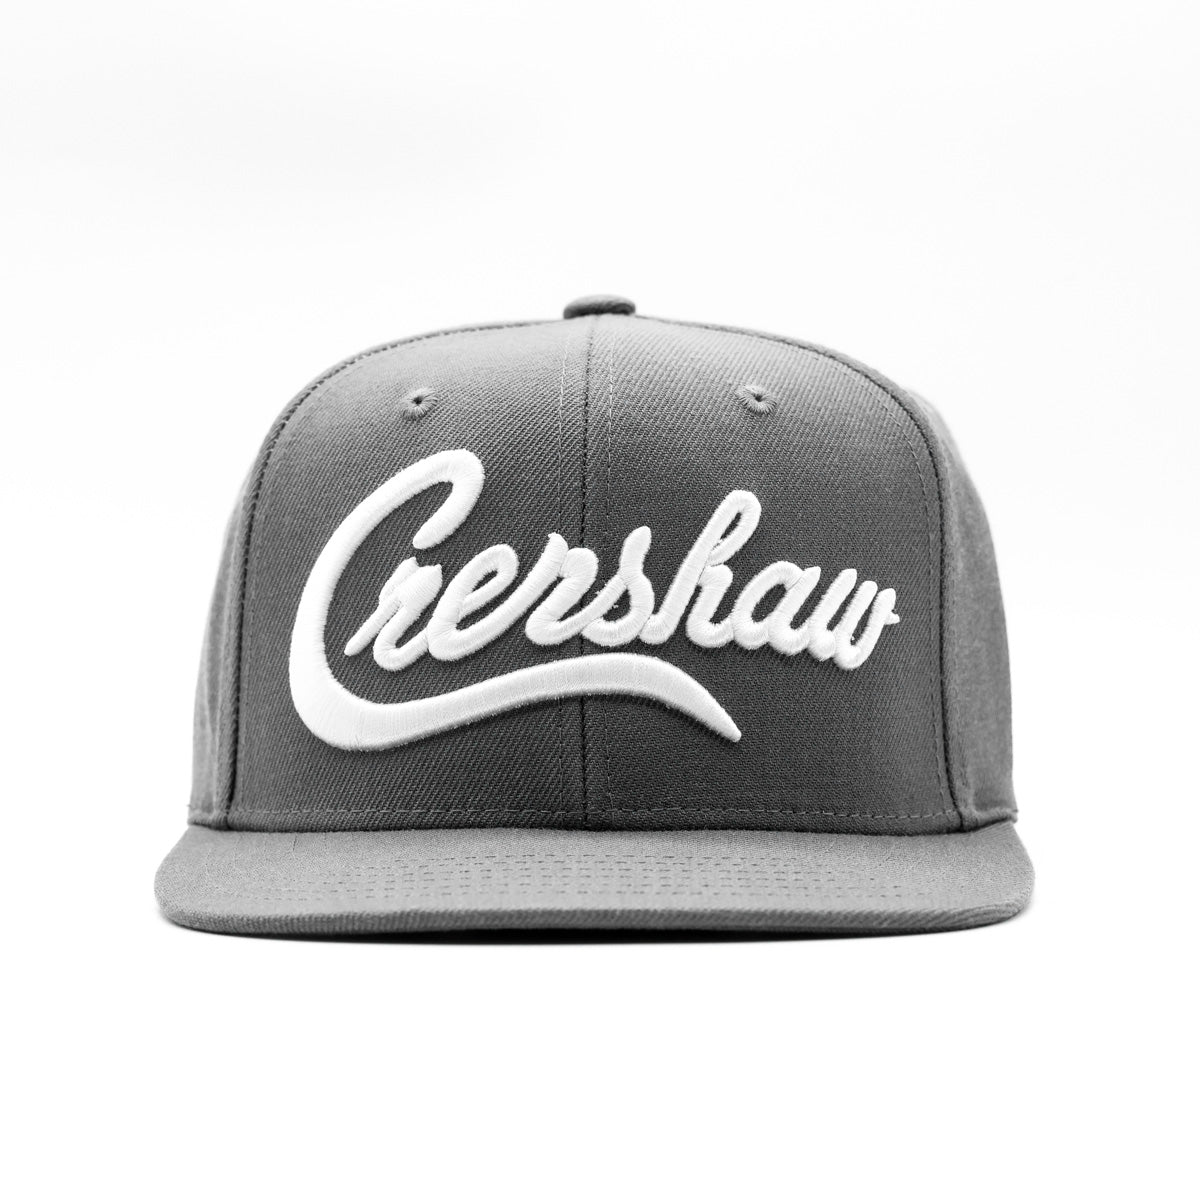 Crenshaw Limited Edition Snapback - Charcoal/White - Front